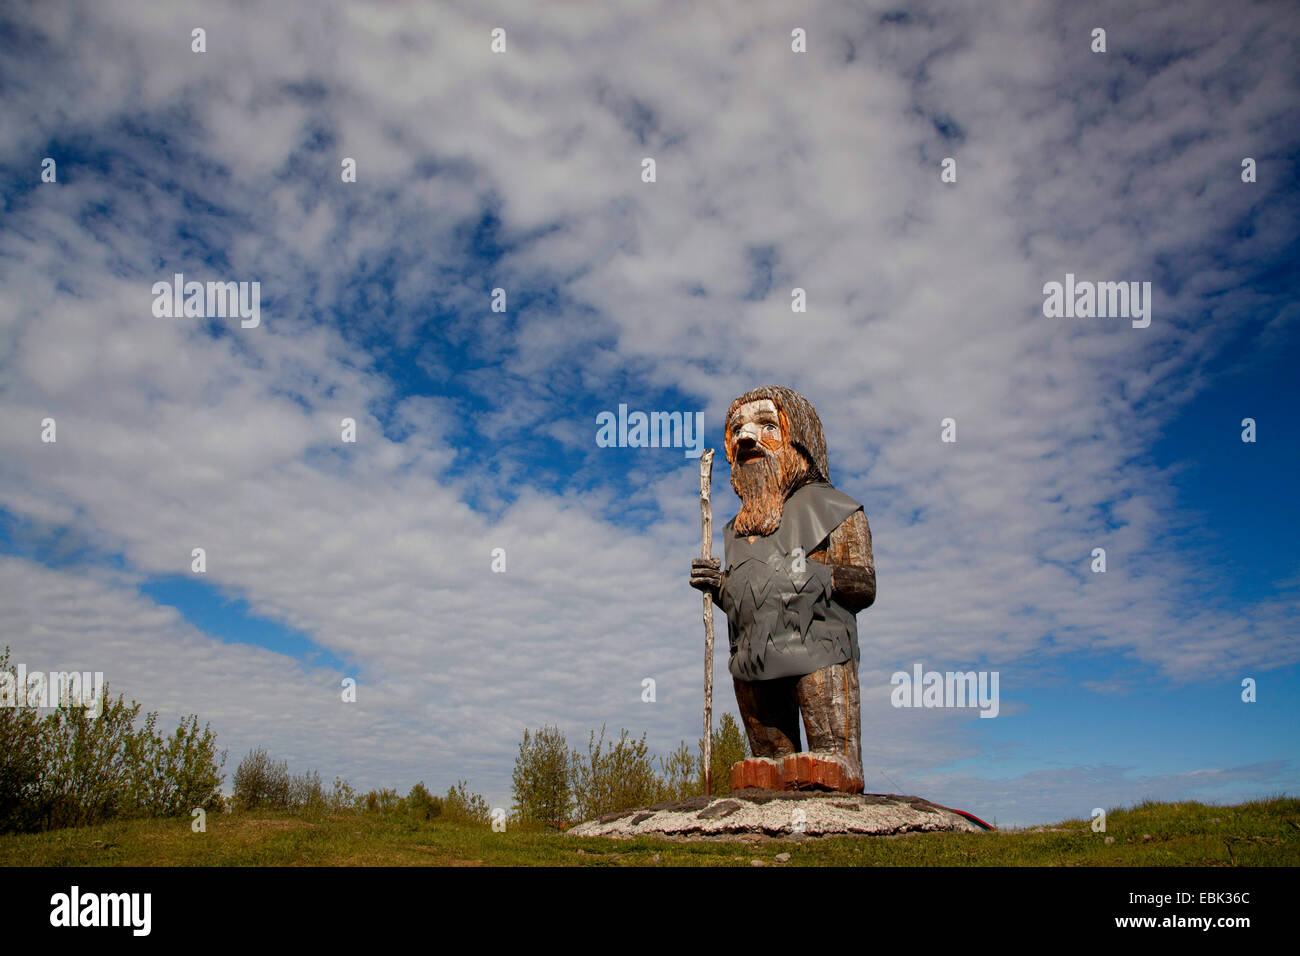 wooden sculpture of Icelandic troll, Iceland Stock Photo